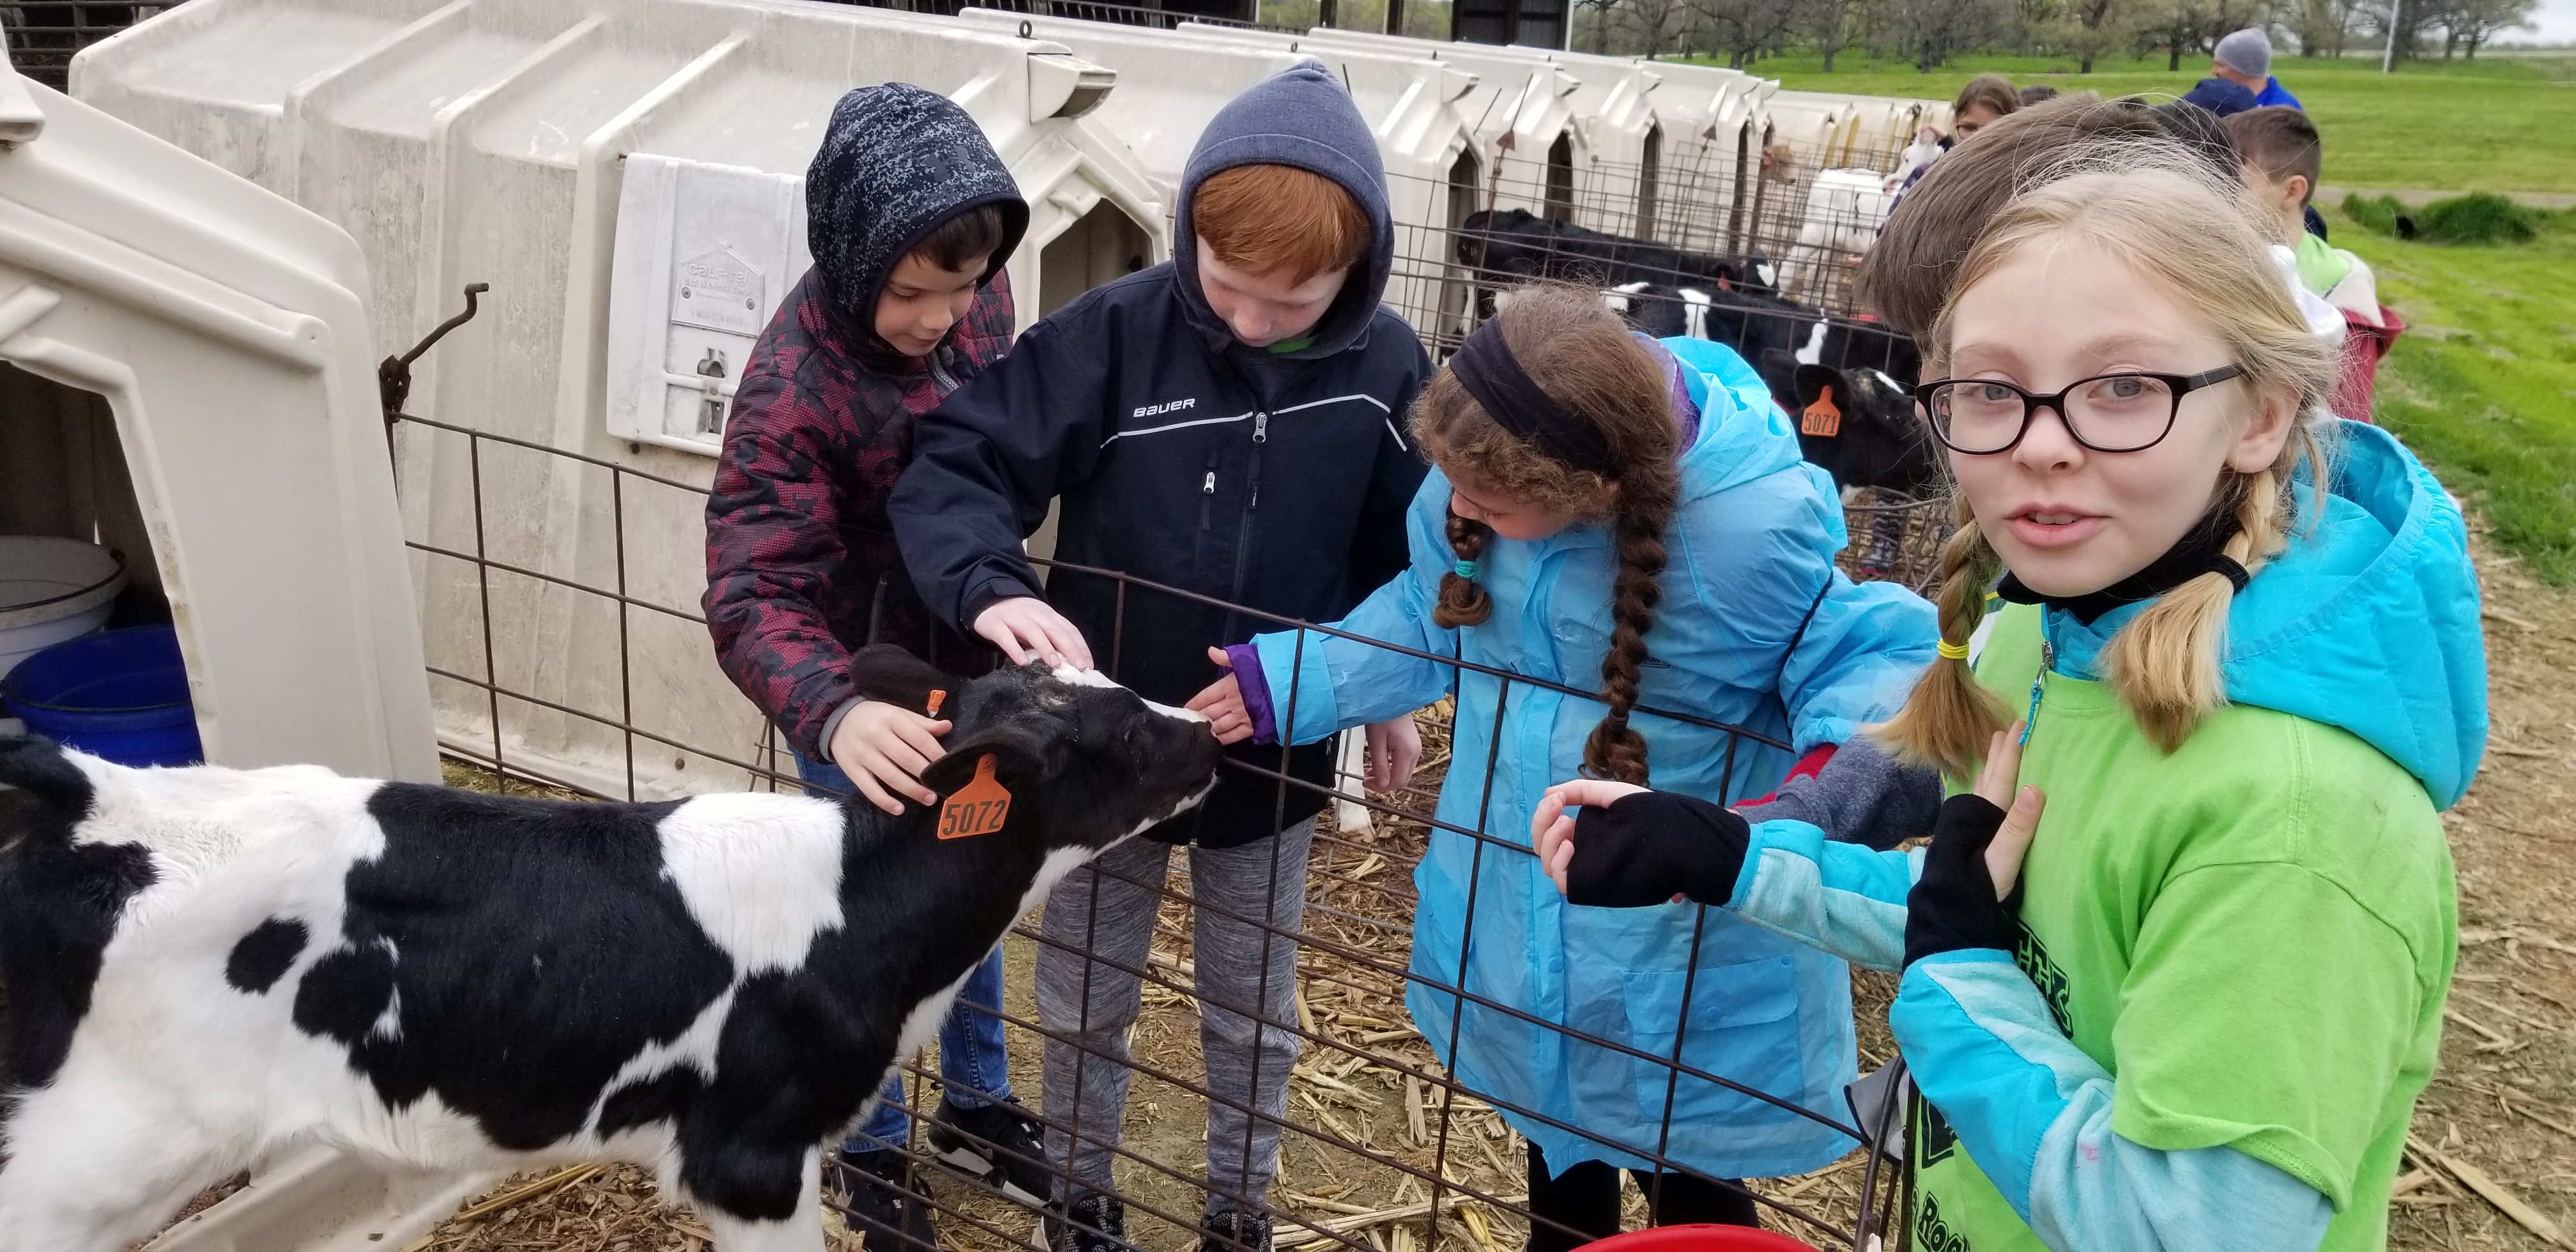 school visits to farms